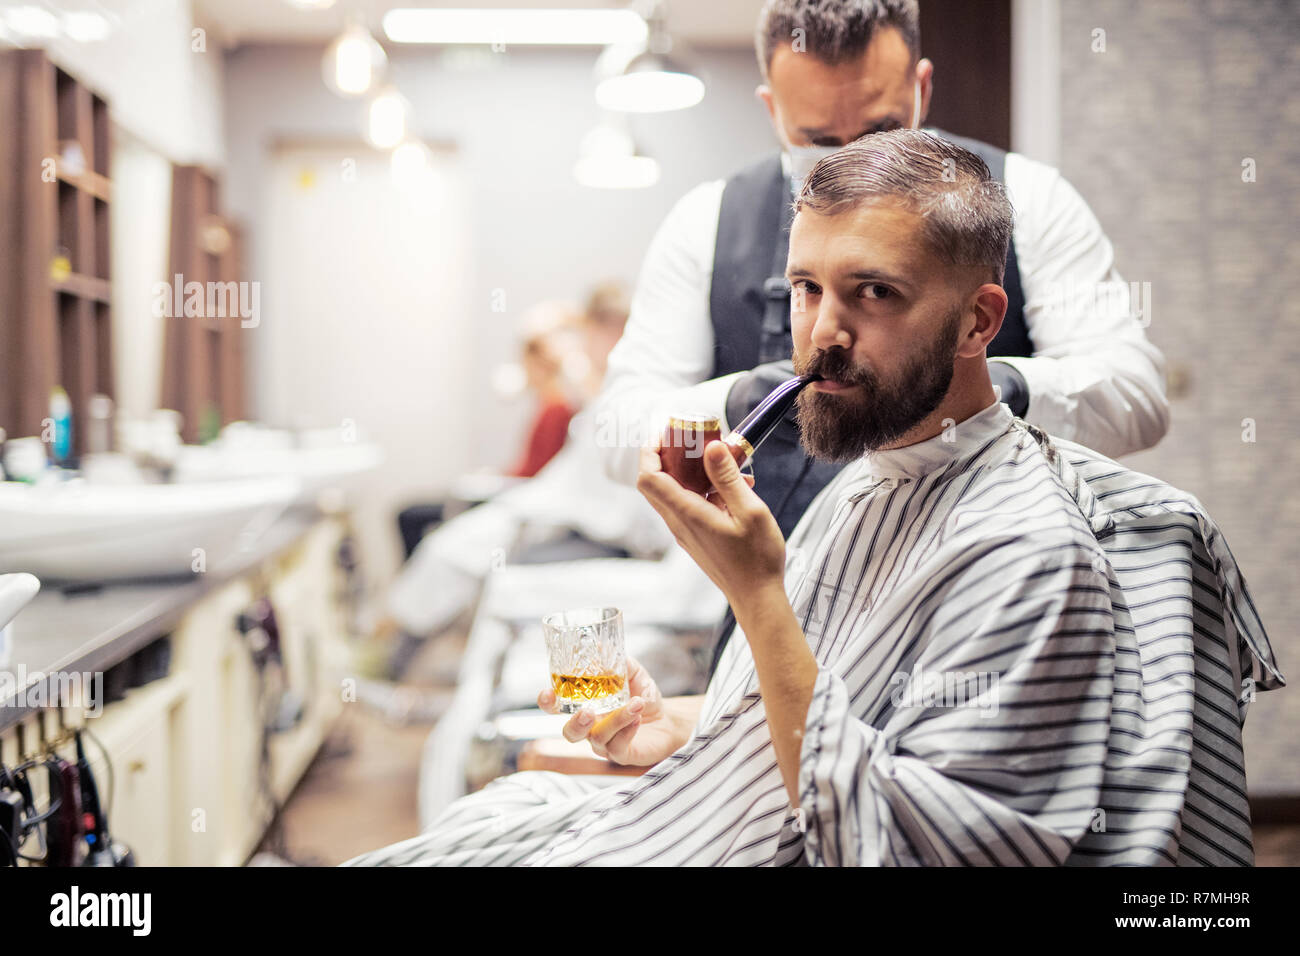 Hipster man client visiting haidresser and hairstylist in barber shop, smoking a pipe. Stock Photo